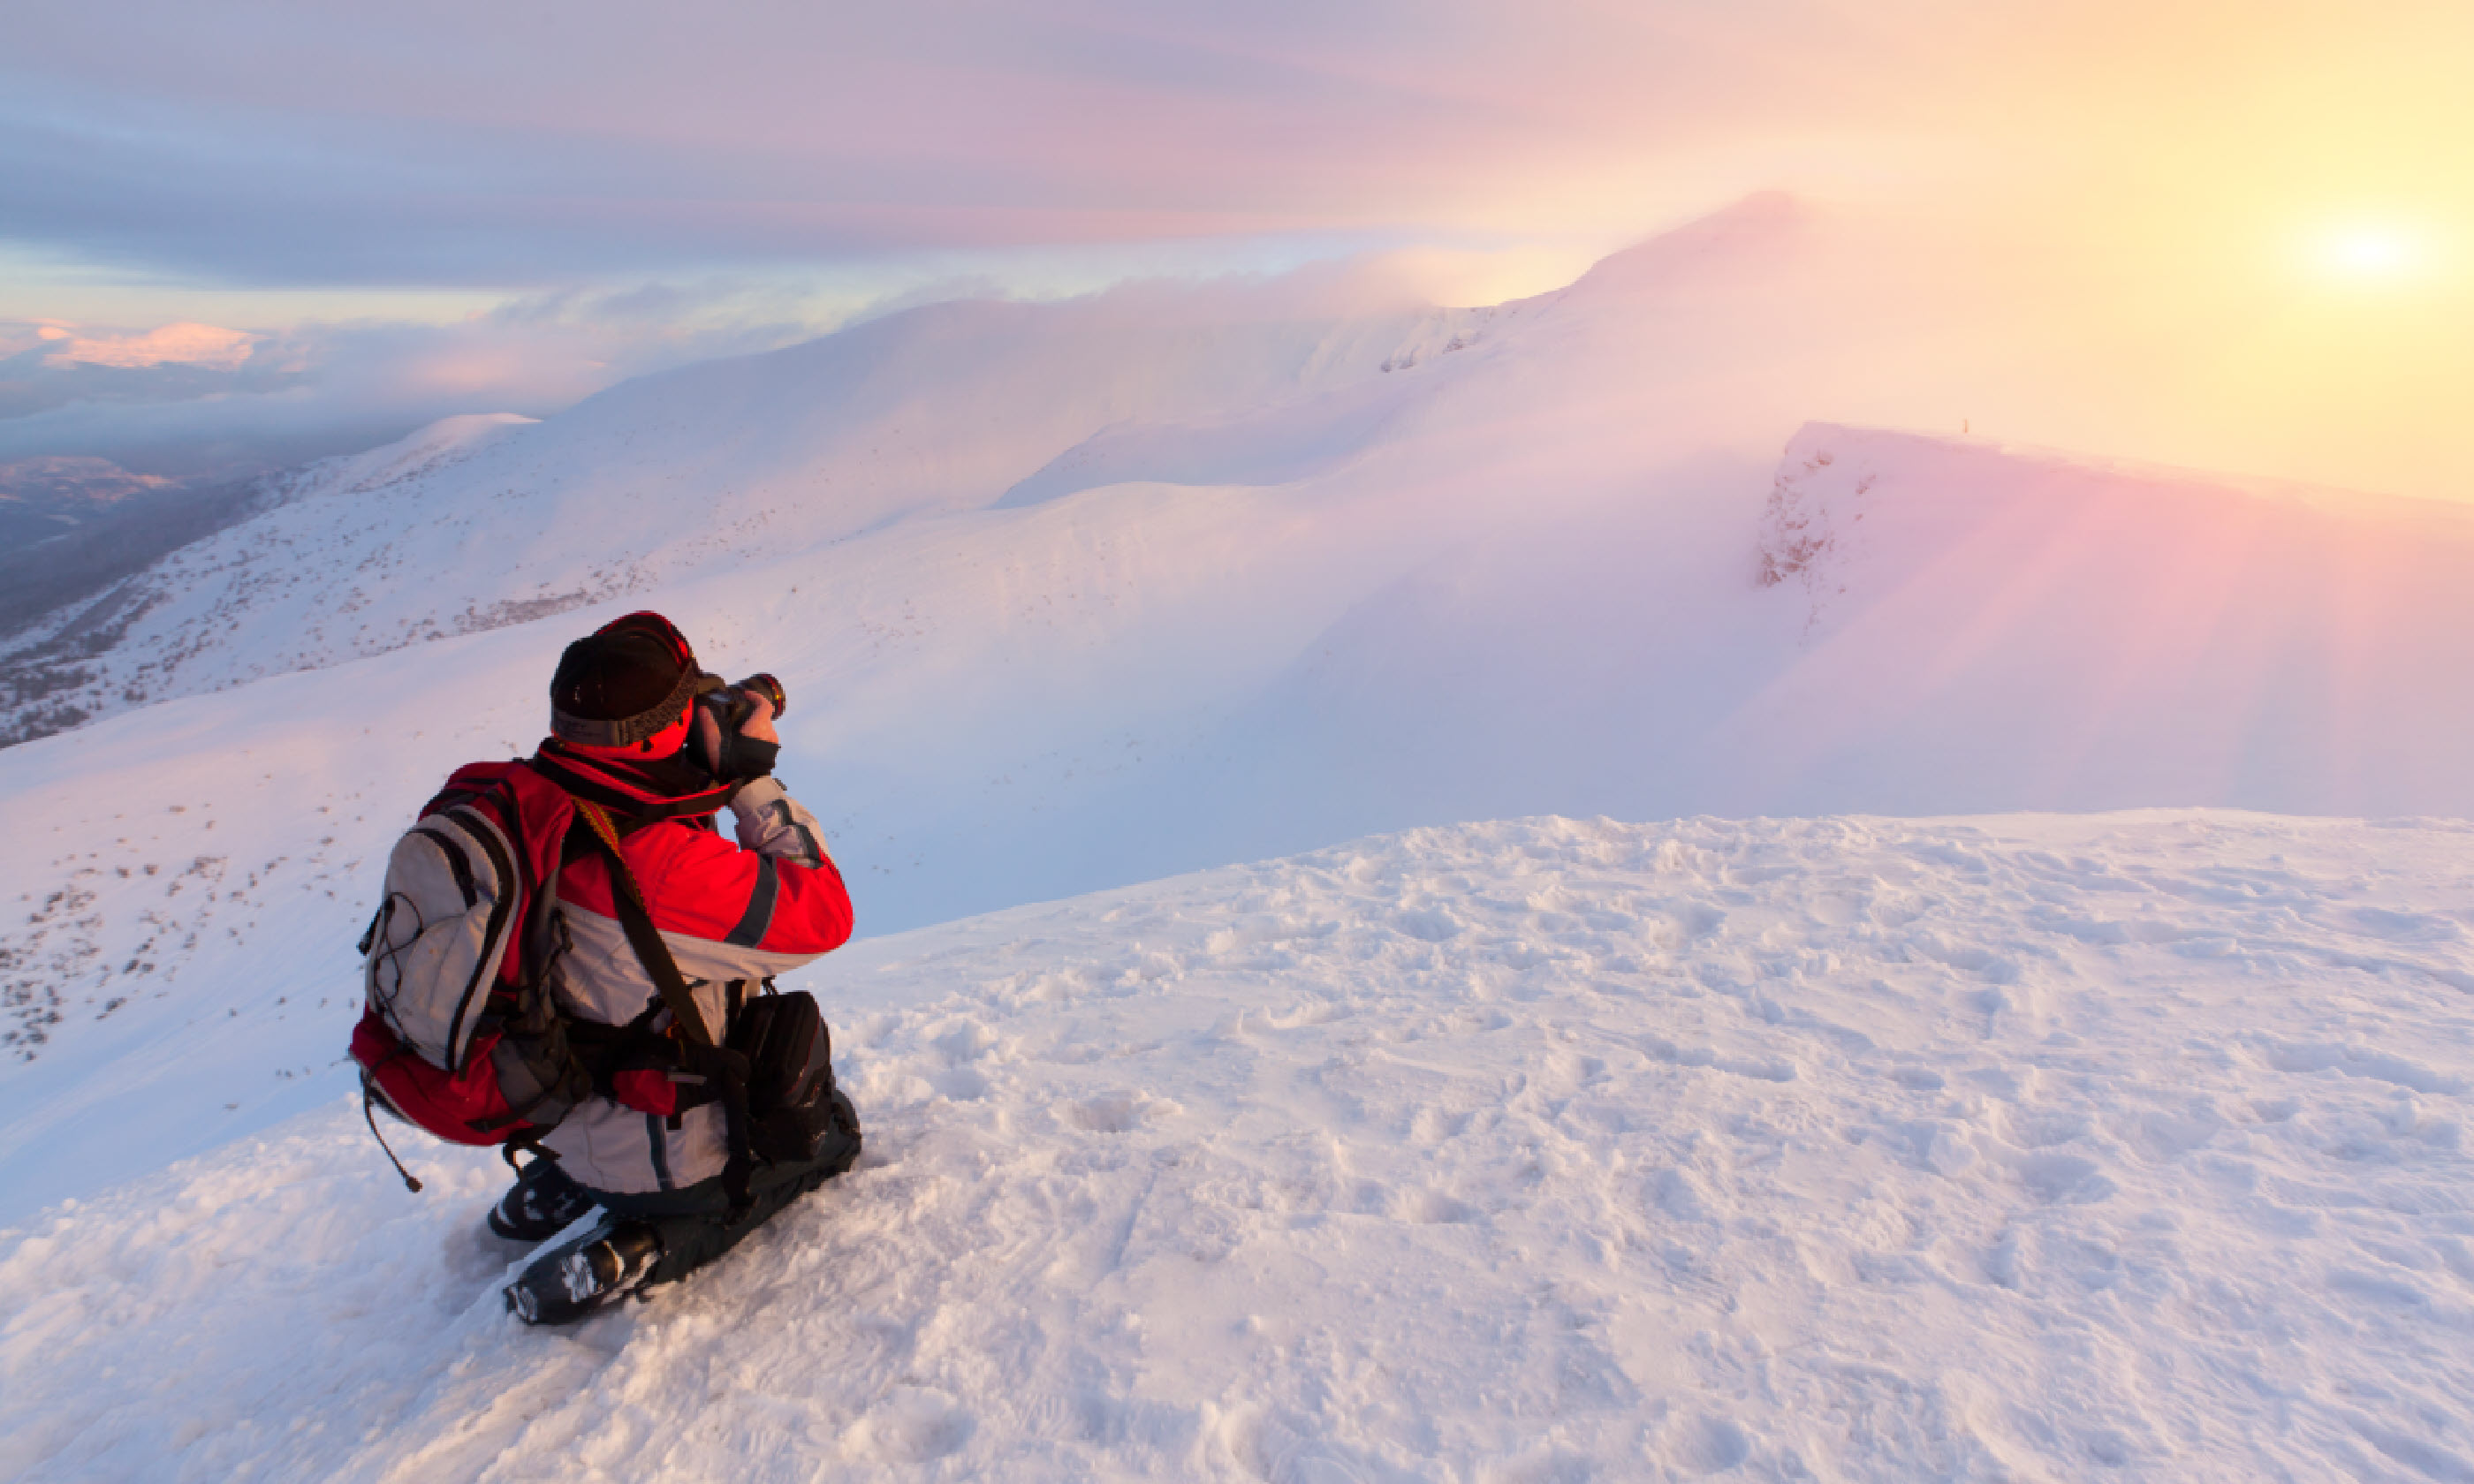 Photographer in the mountains (Shutterstock)